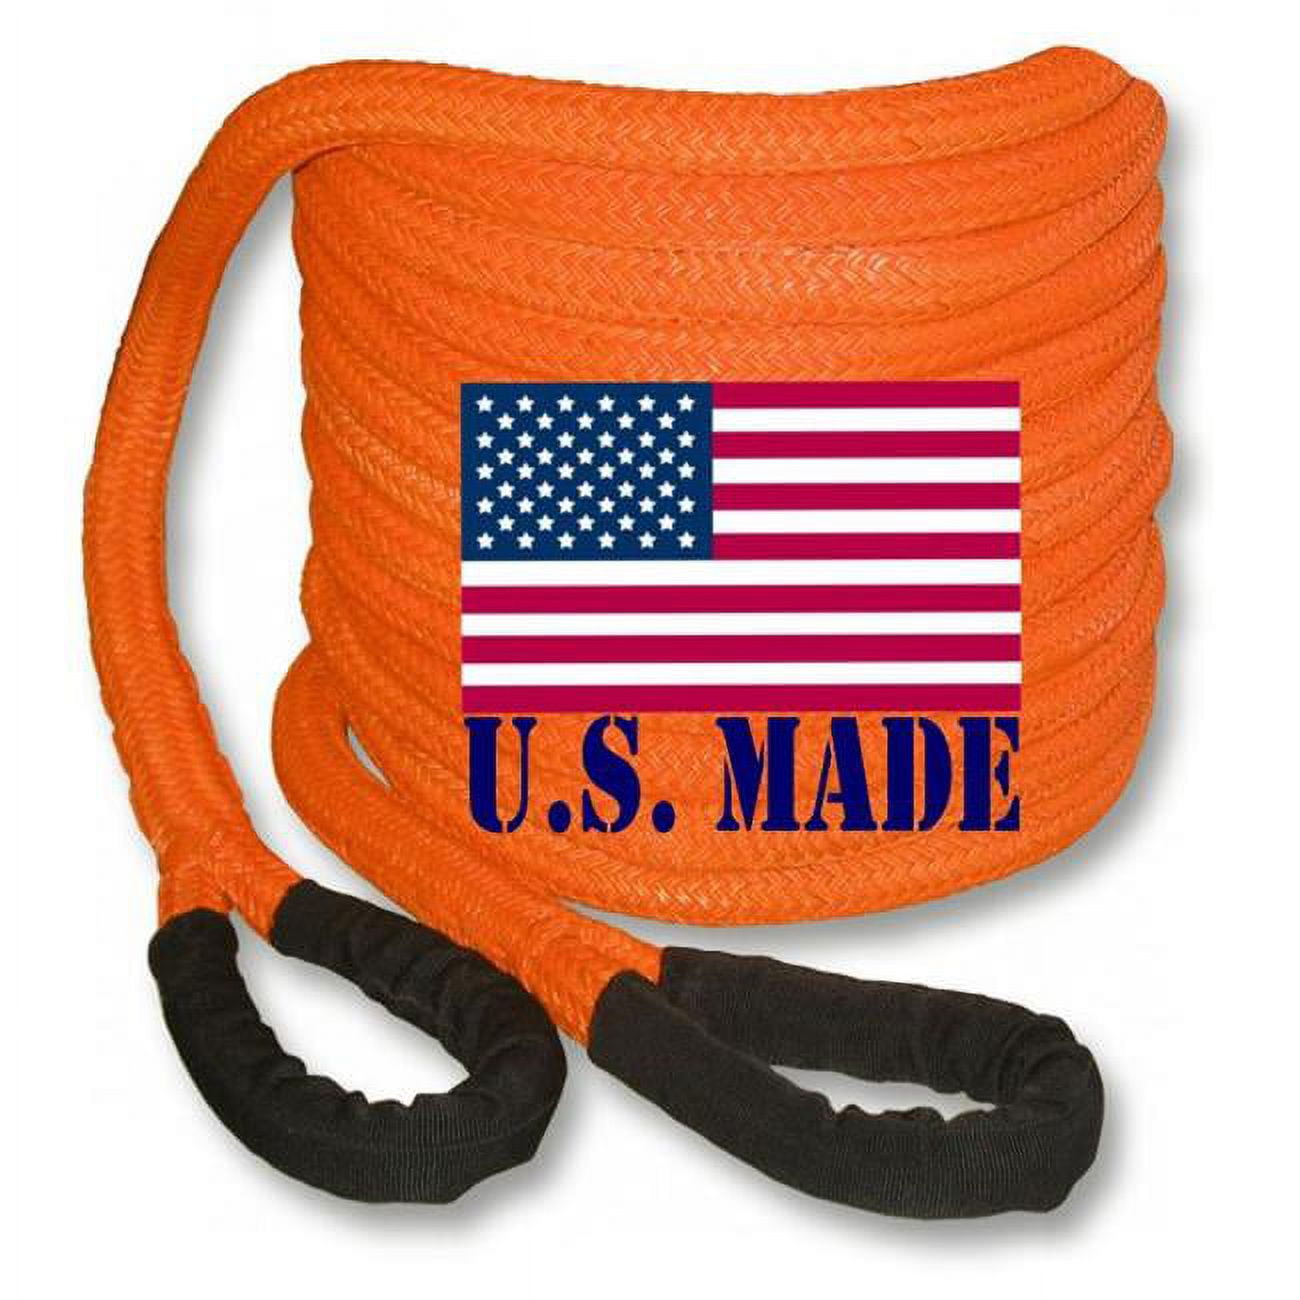 U.s. Made 1 Inch X 10 Ft "safety Orange" Safe-t-line® Kinetic Snatch Rope (4x4 Vehicle Recovery)